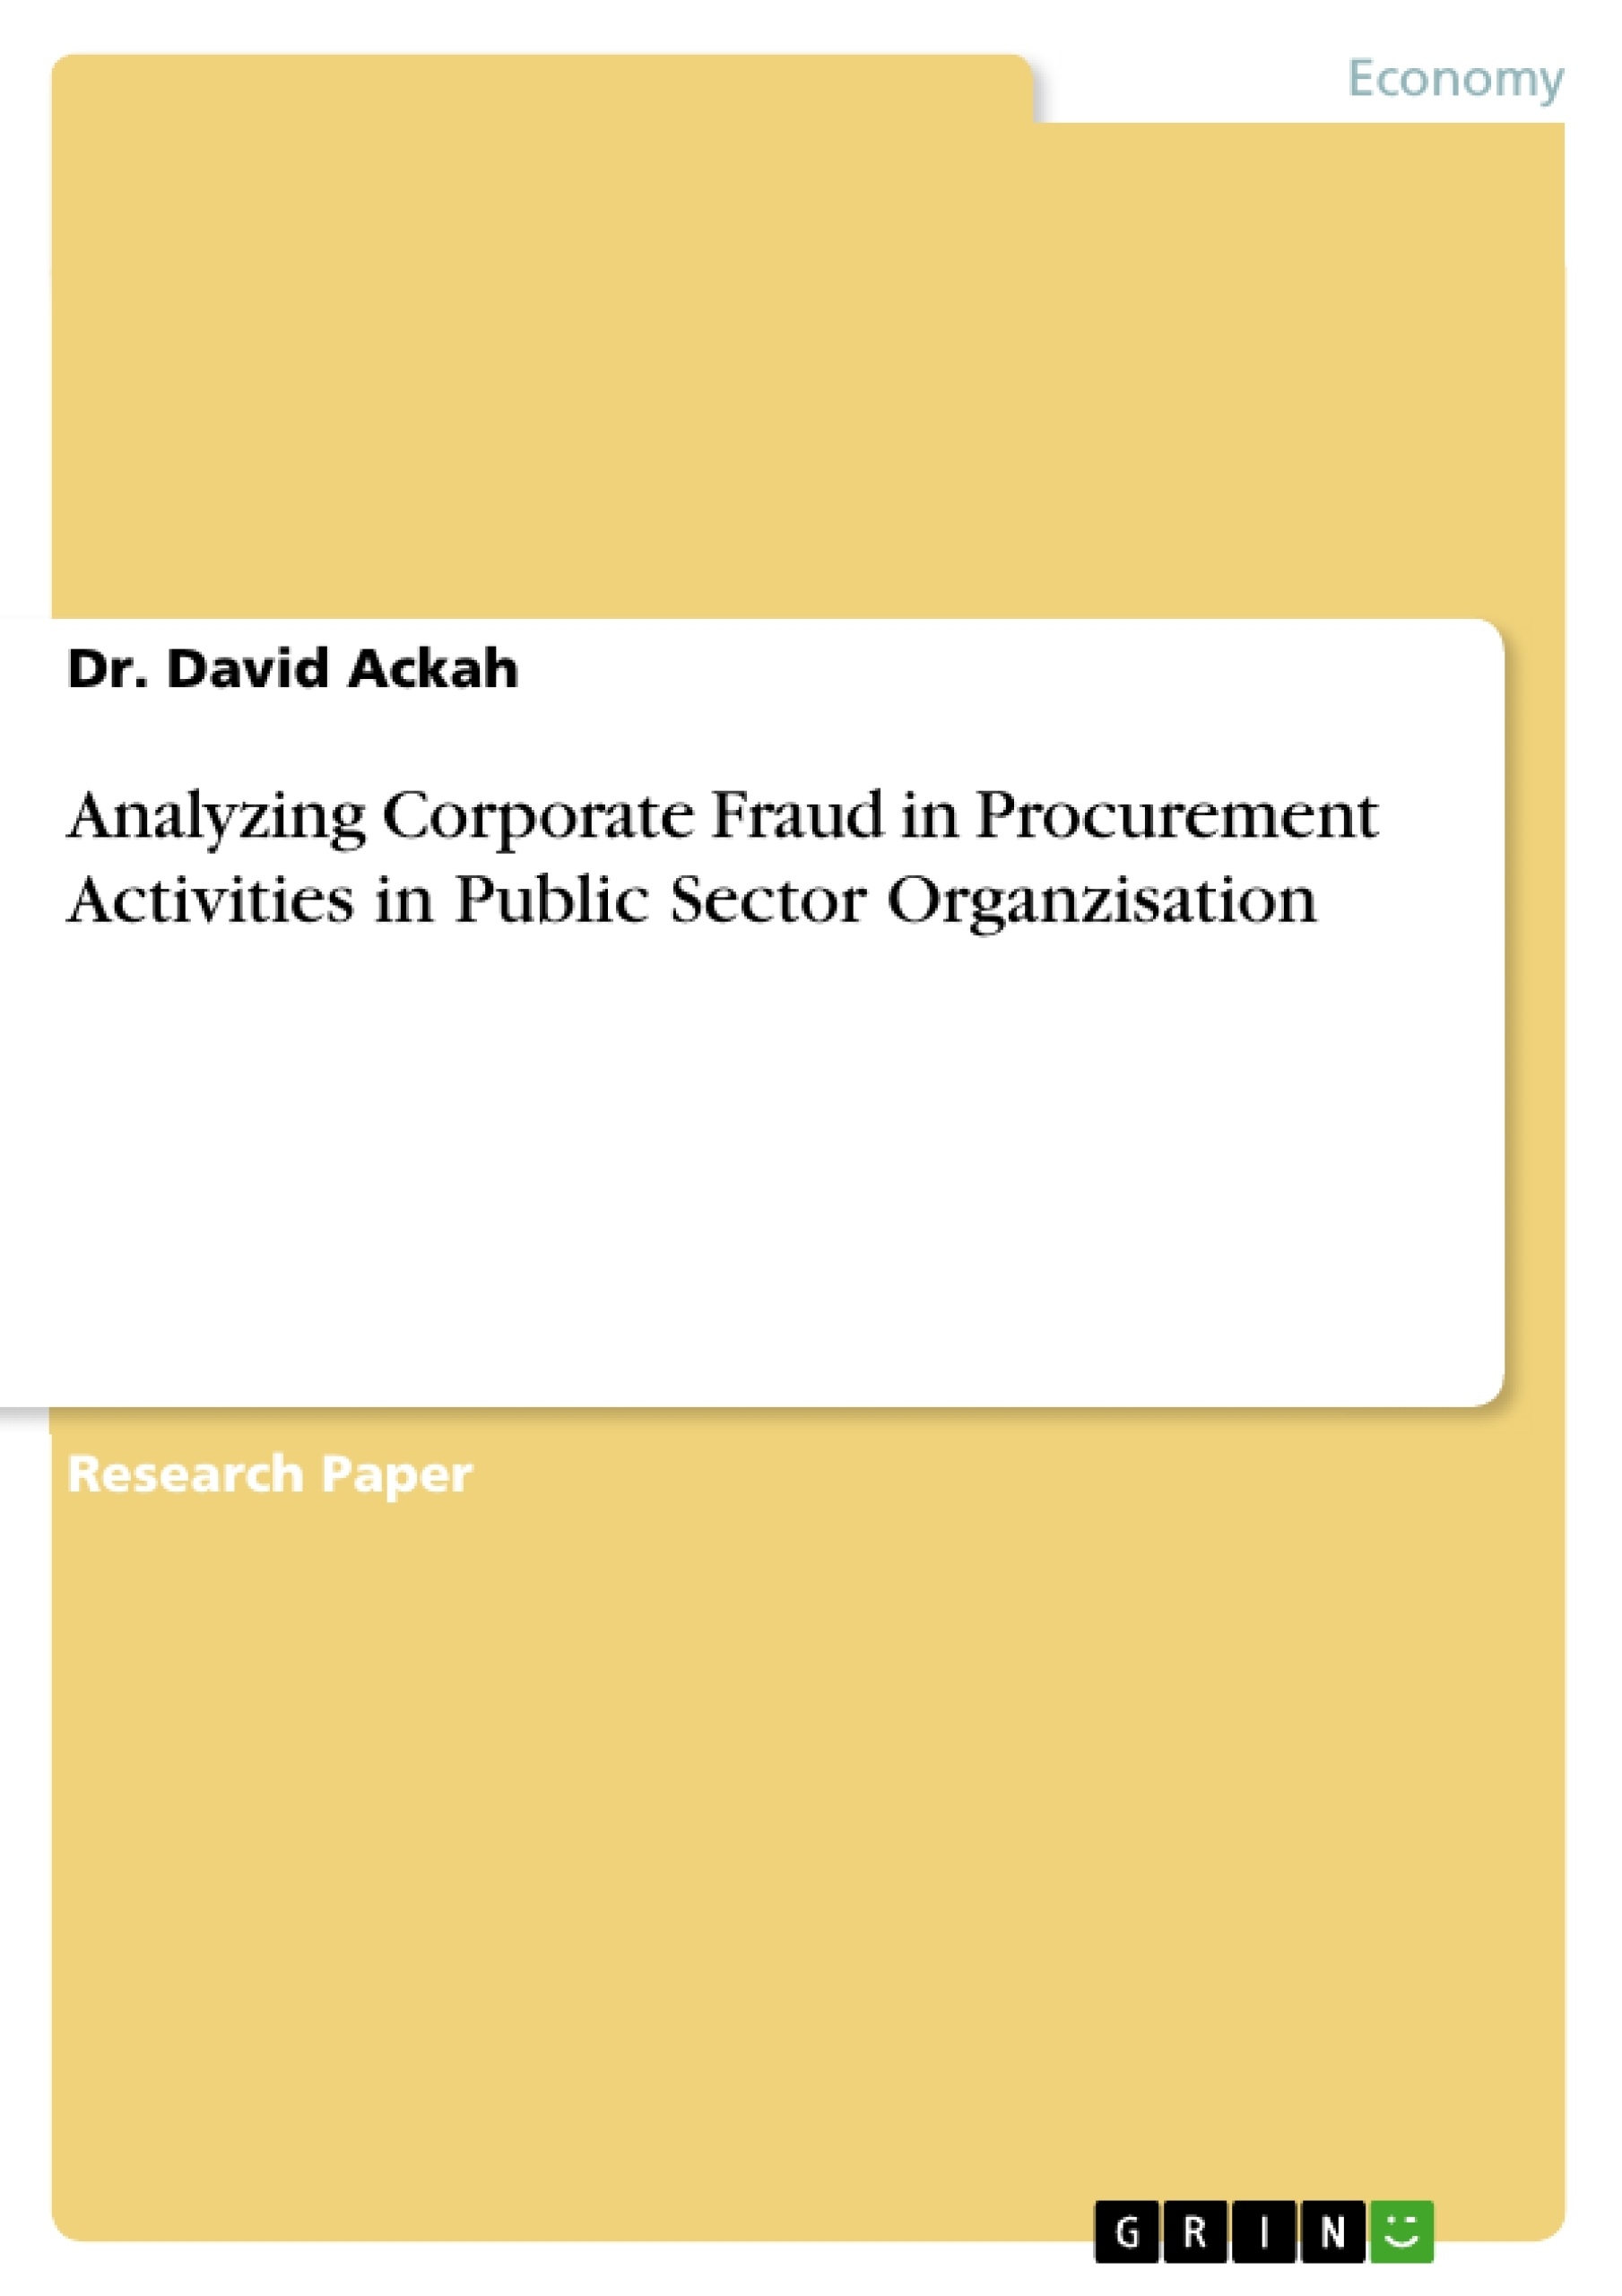 Title: Analyzing Corporate Fraud in Procurement Activities in Public Sector Organzisation